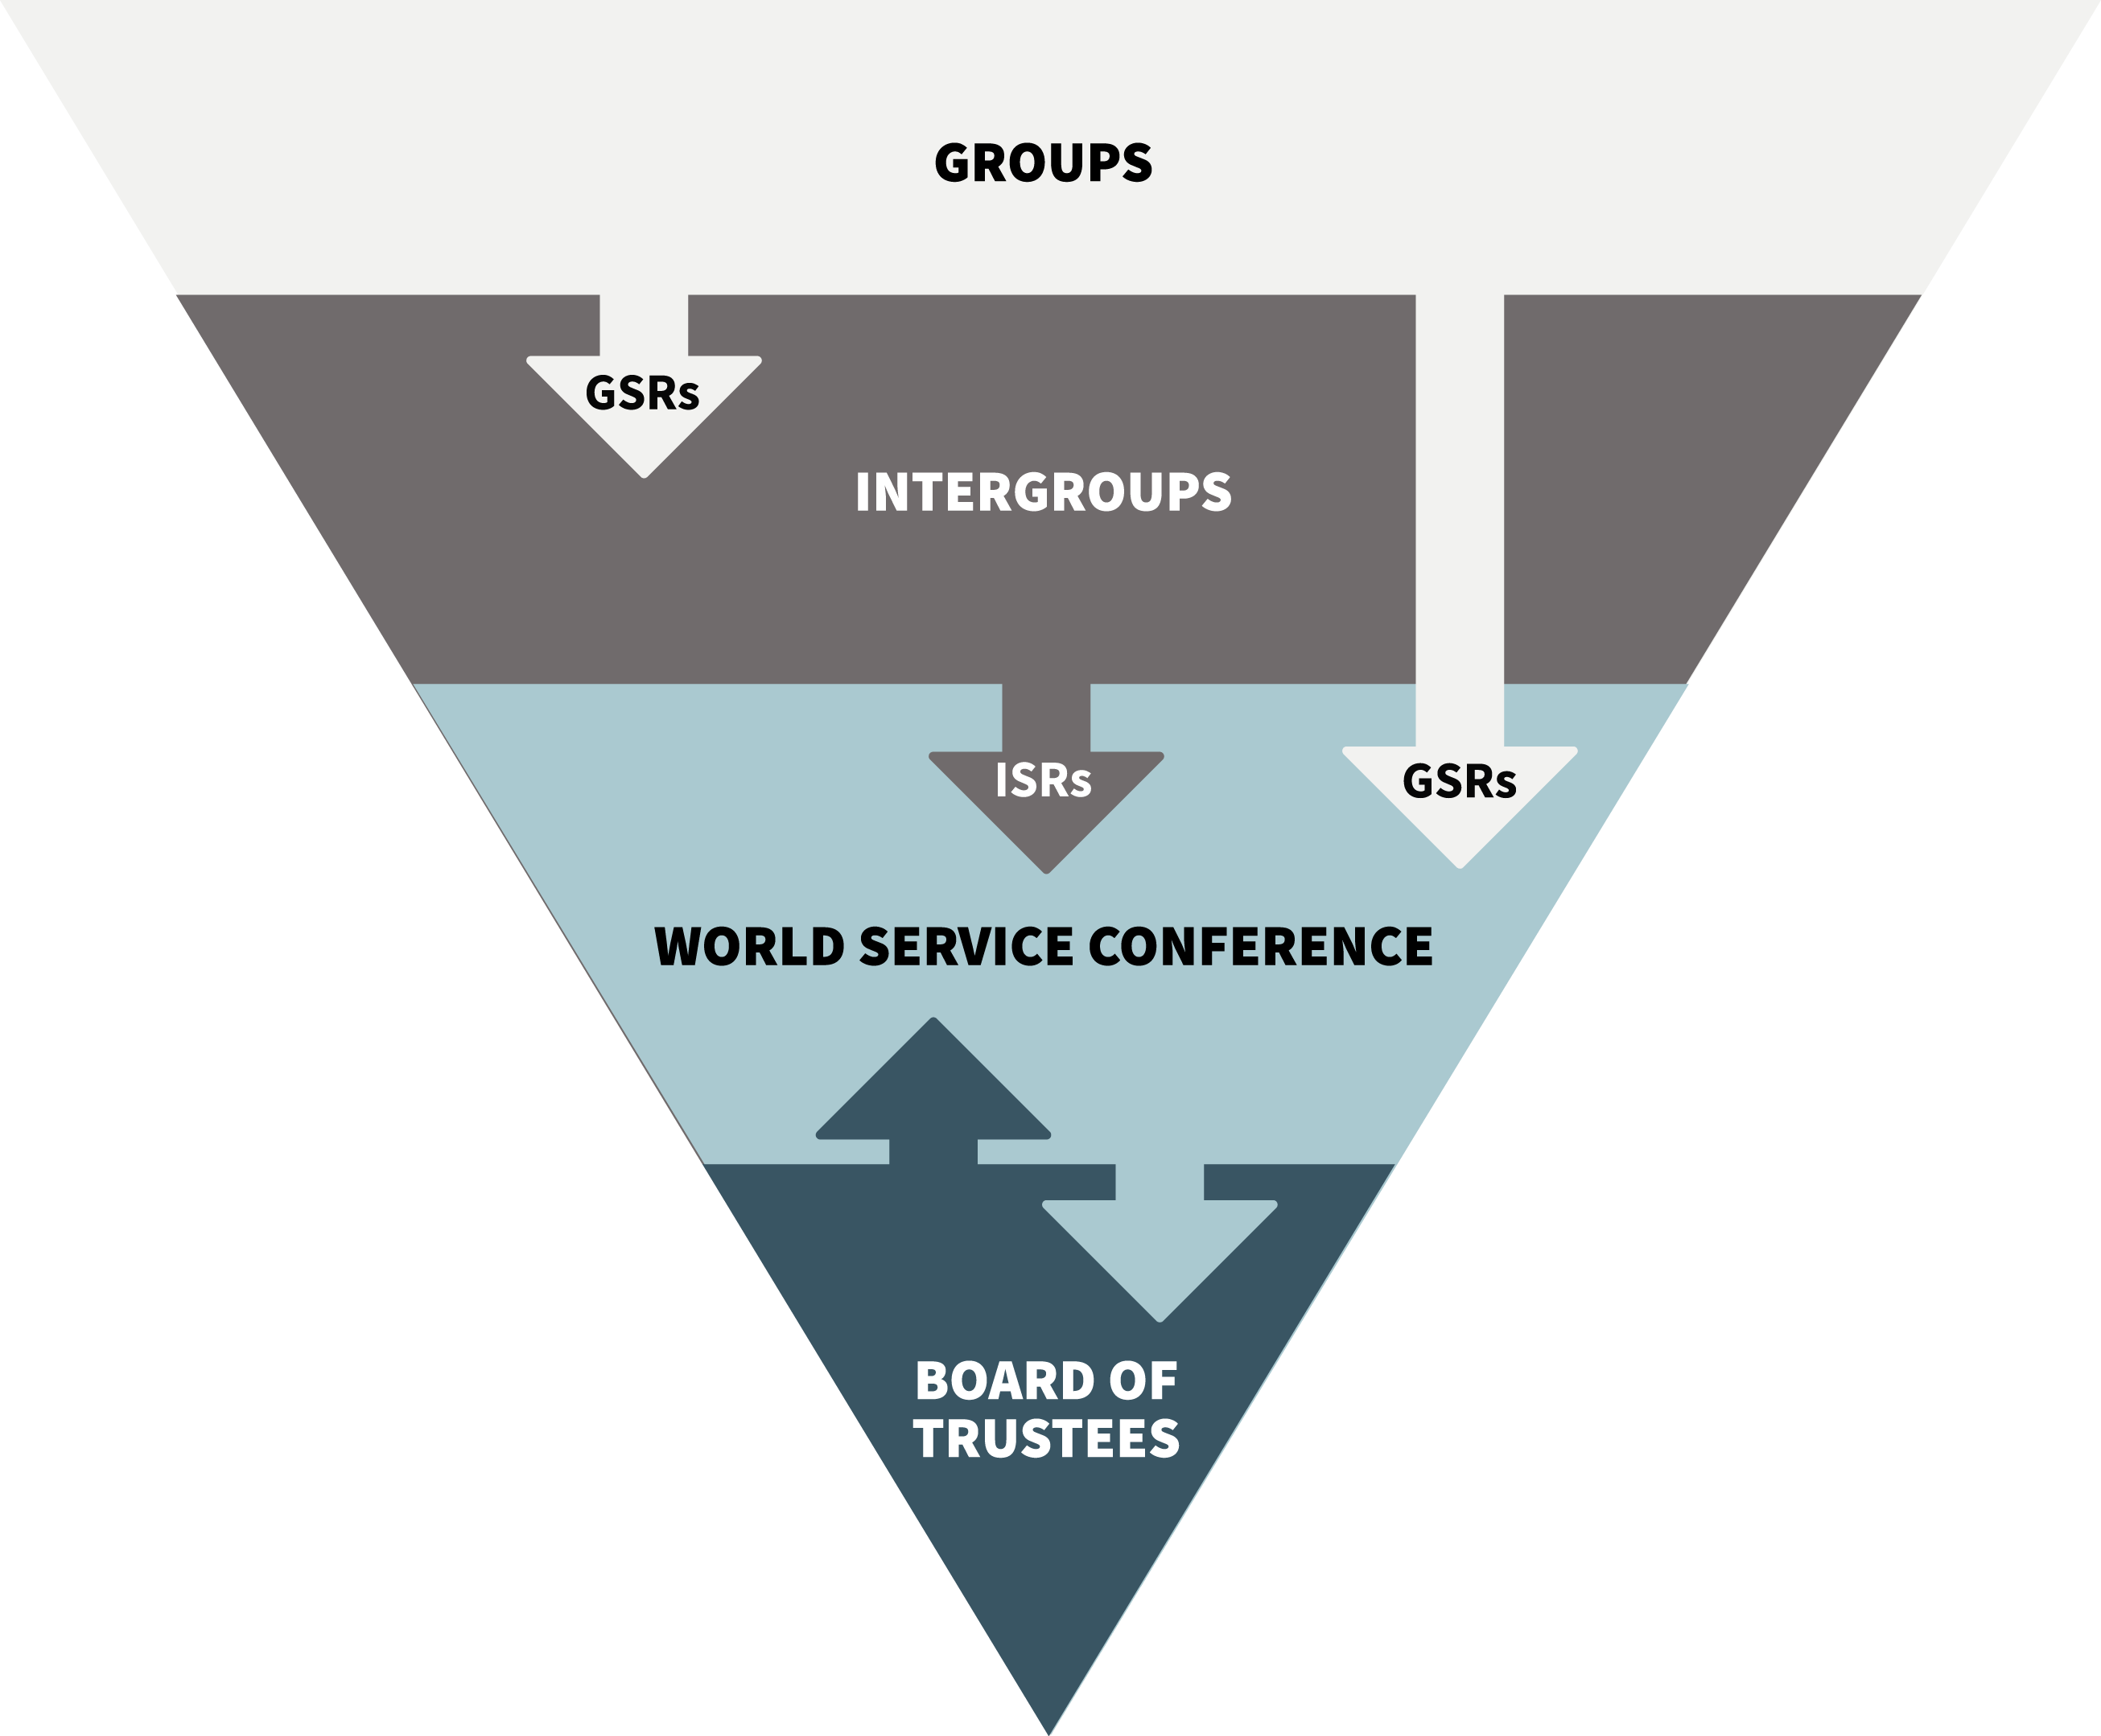 Illustration of the service structure of GSA, showing an inverted pyramid with groups at the top, followed by area intergroups, followed by World Service Conference, with the Board of Trustees at the bottom. Arrows indicate the direction of representation: GSRs to Intergroups and the World Service Conference, ISRs to the World Service Conference, Trustees to the World Service Conference.